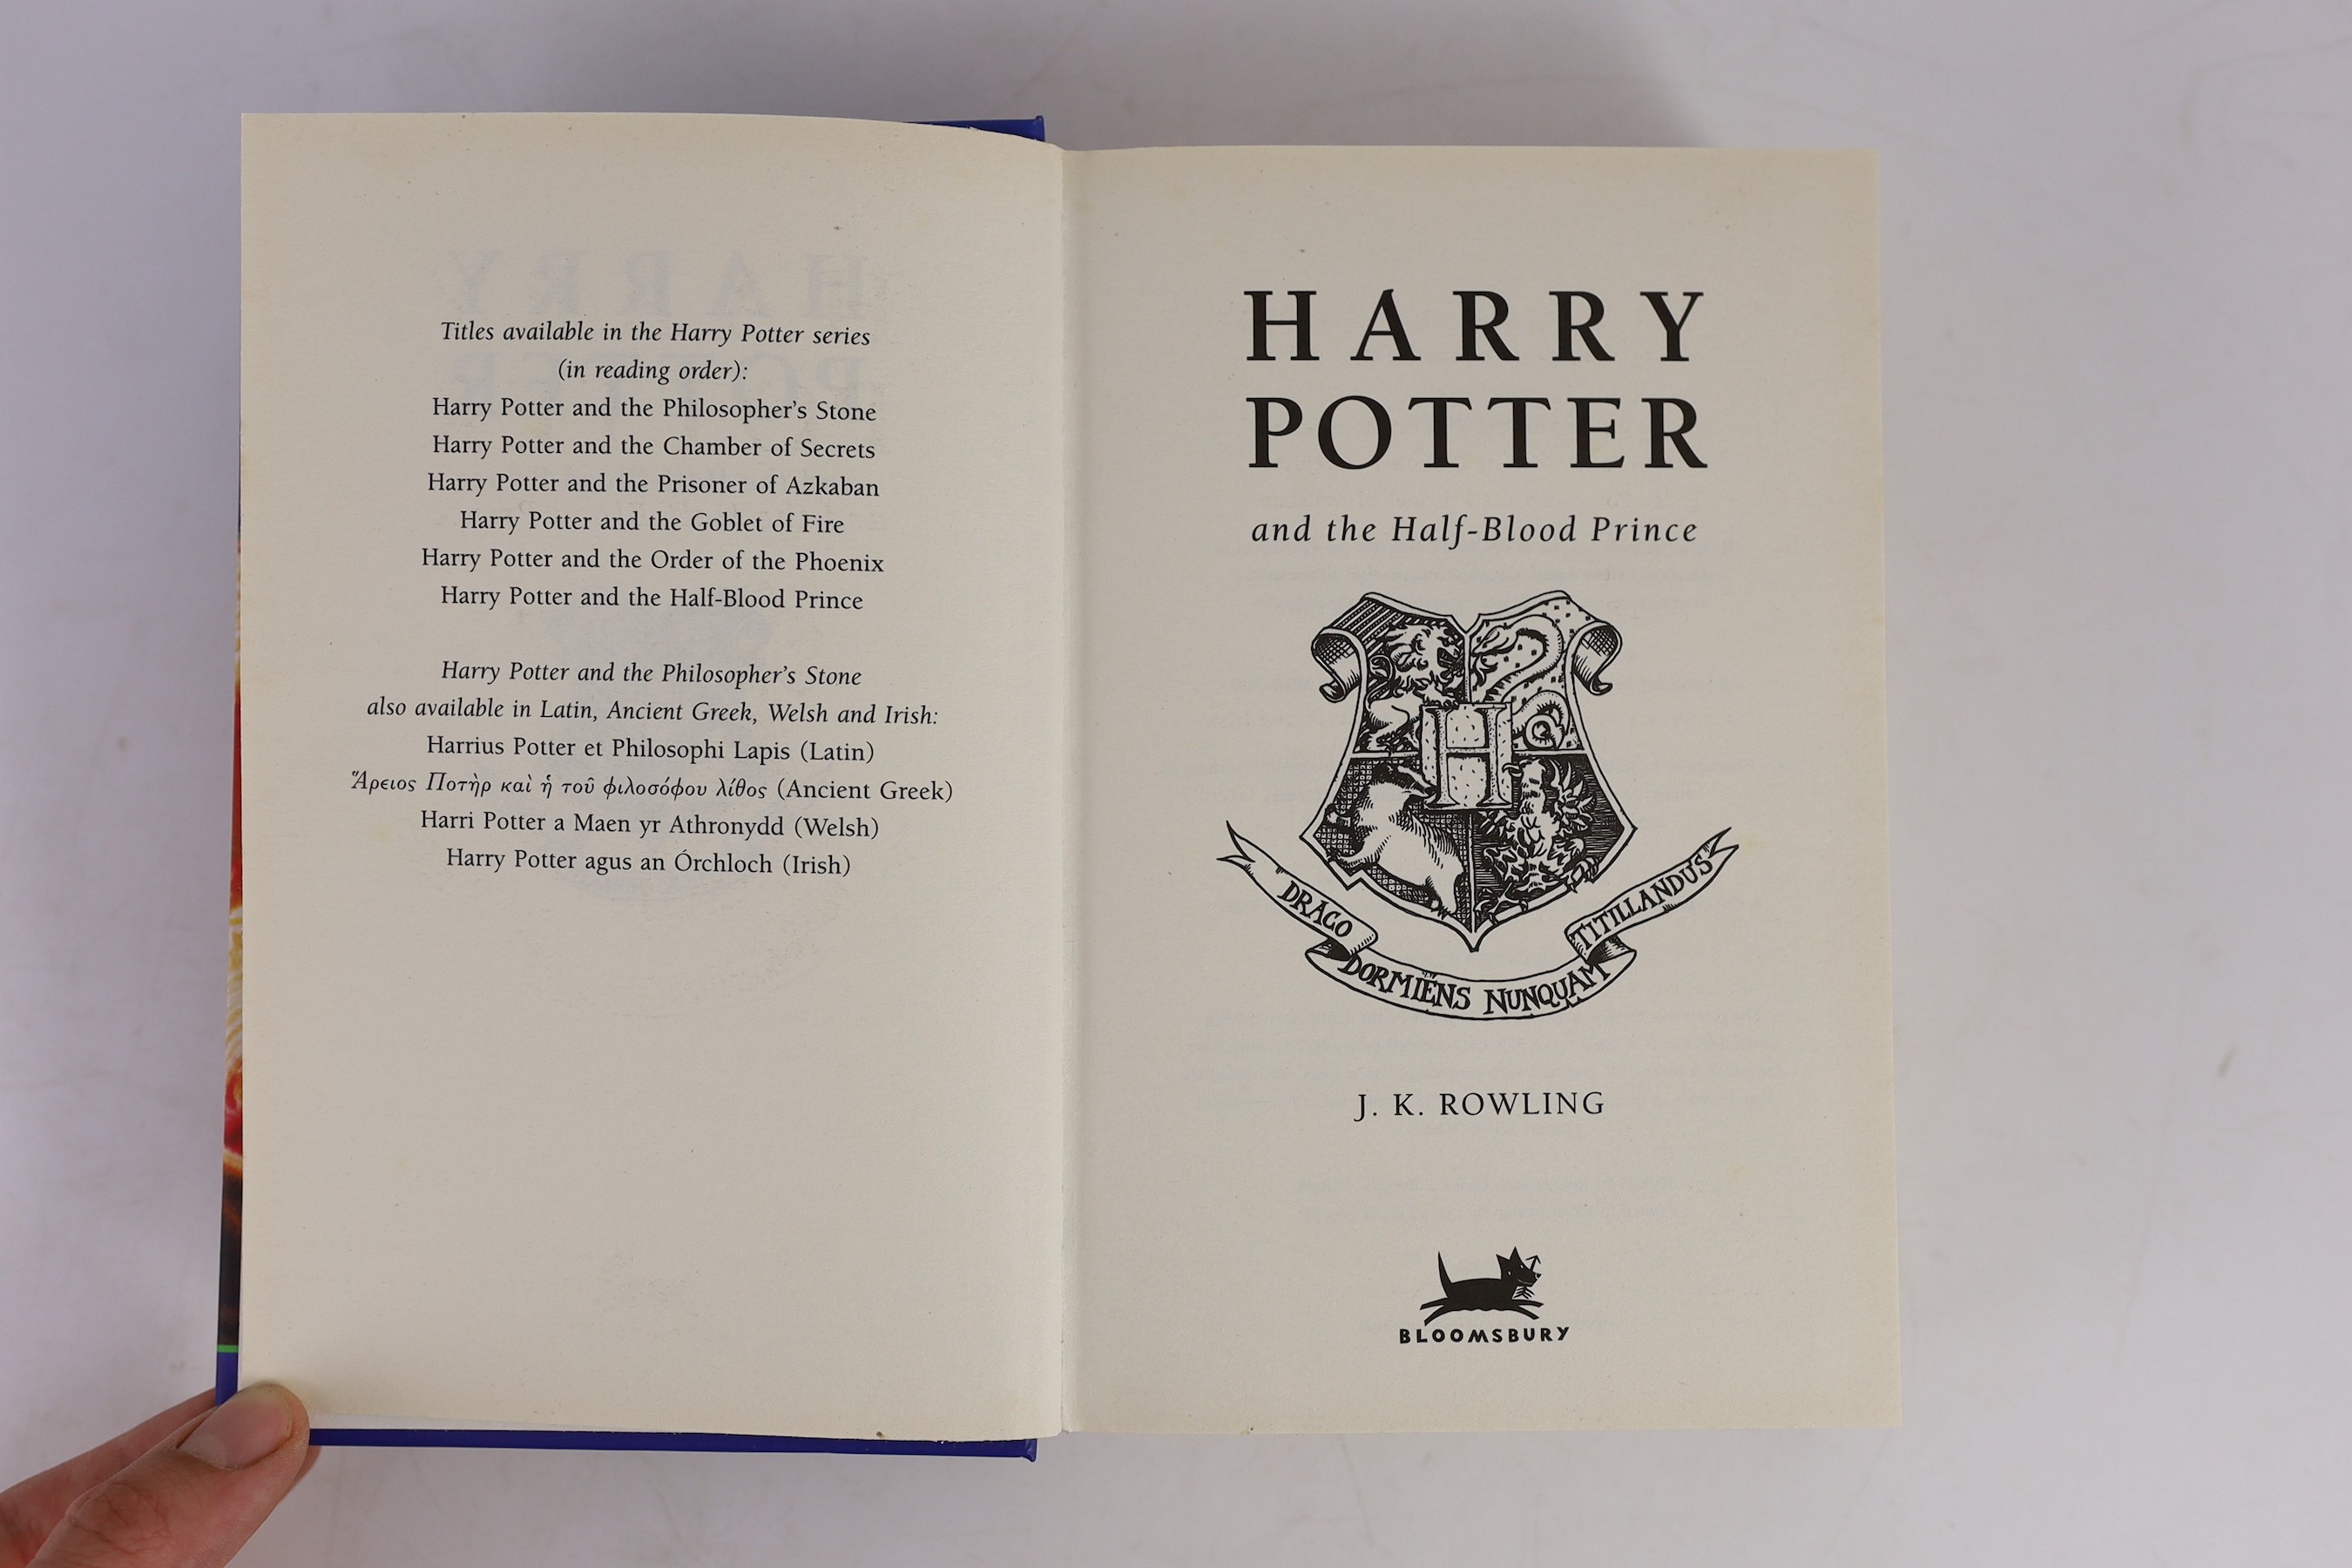 Rowling, J.K - Harry Potter and the Half-Blood Prince, 1st edition, with misprint on p.99, in unclipped d/j, Bloomsbury, London, 2005